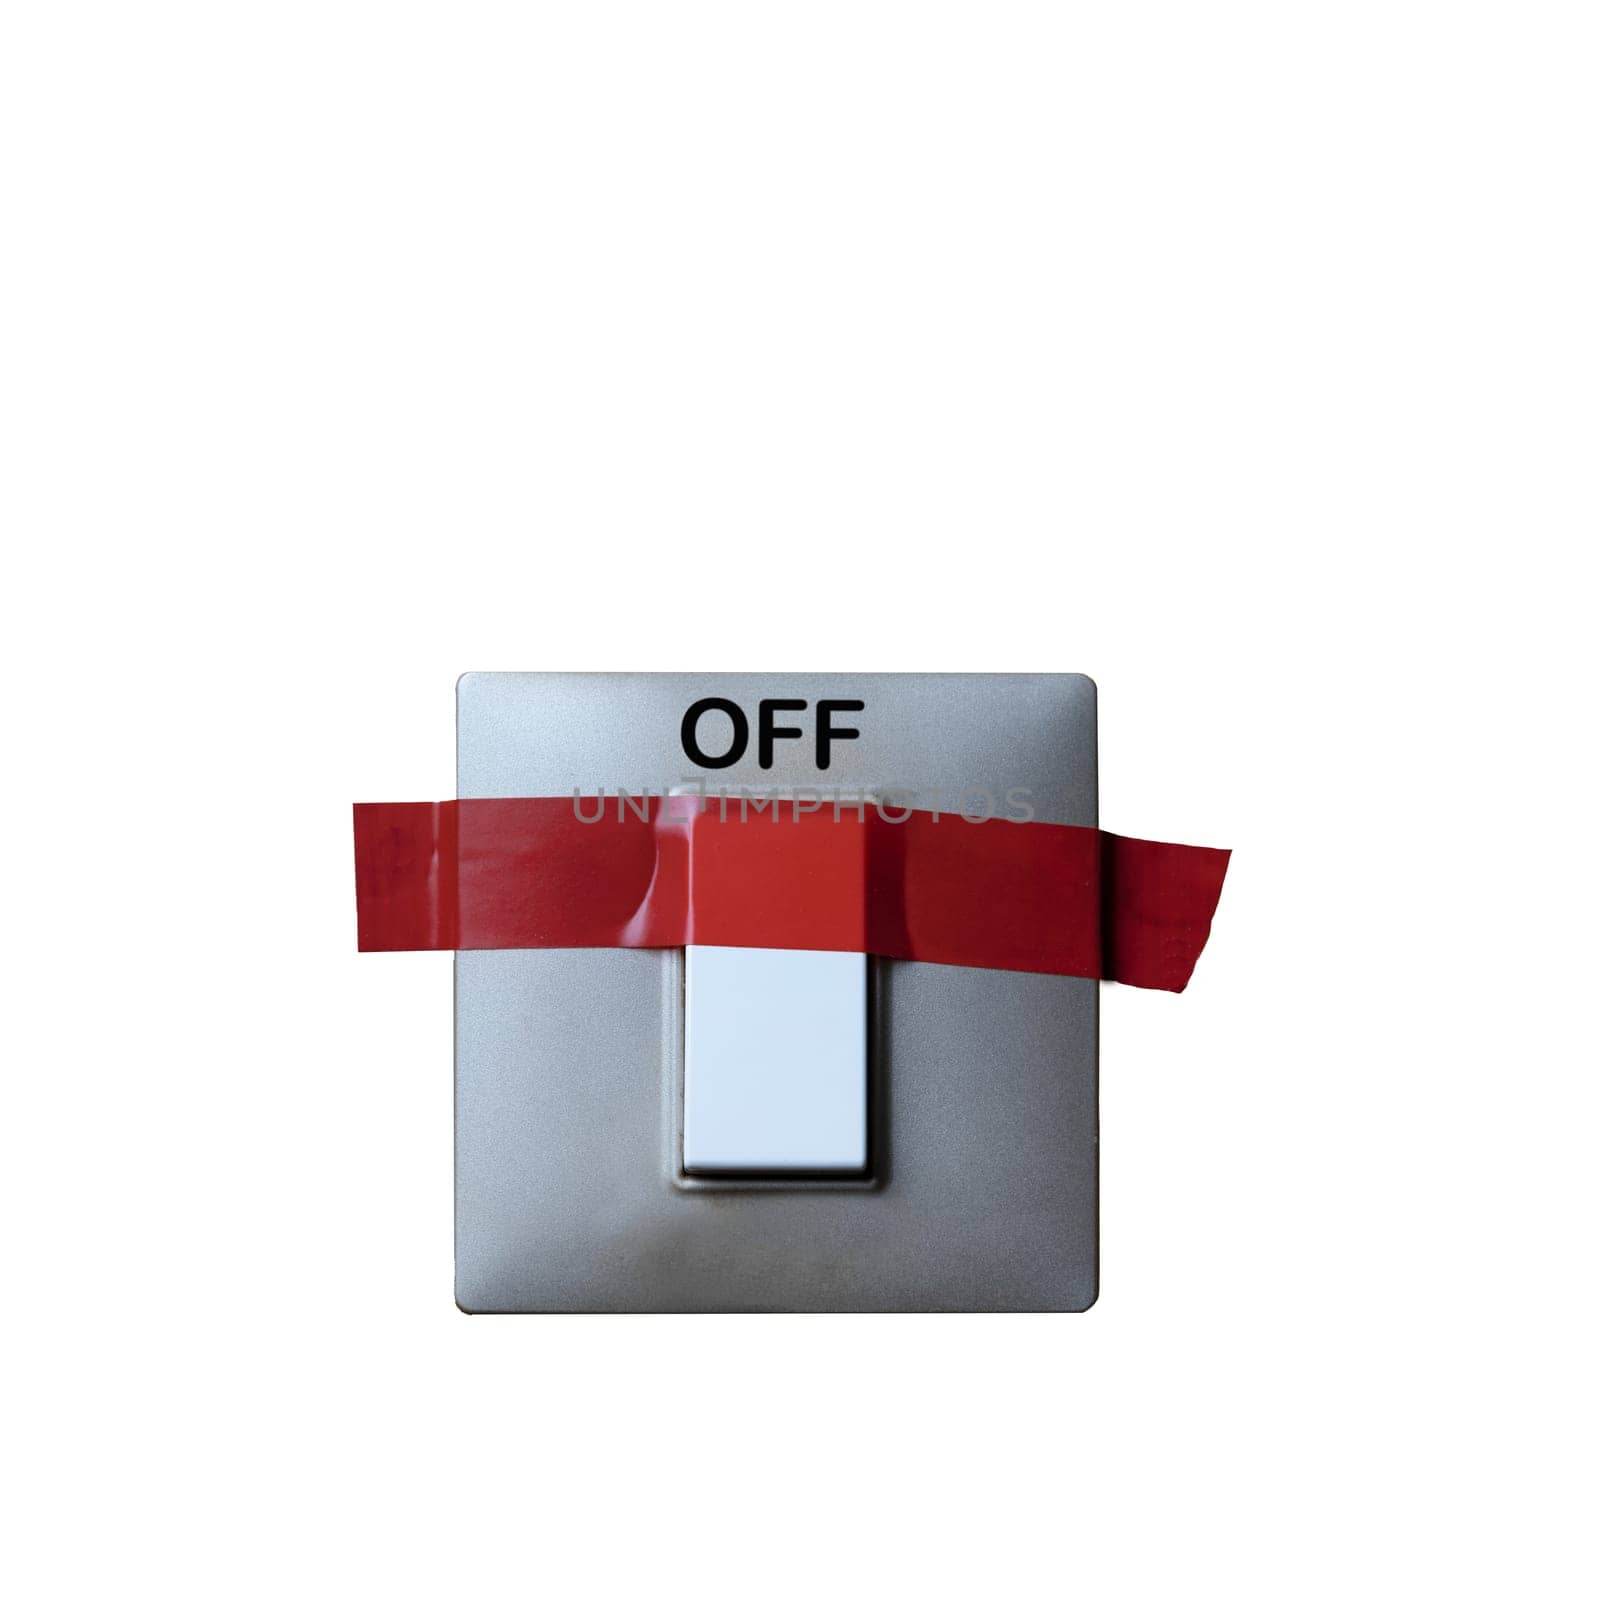 a switch stuck with red tape in the off position